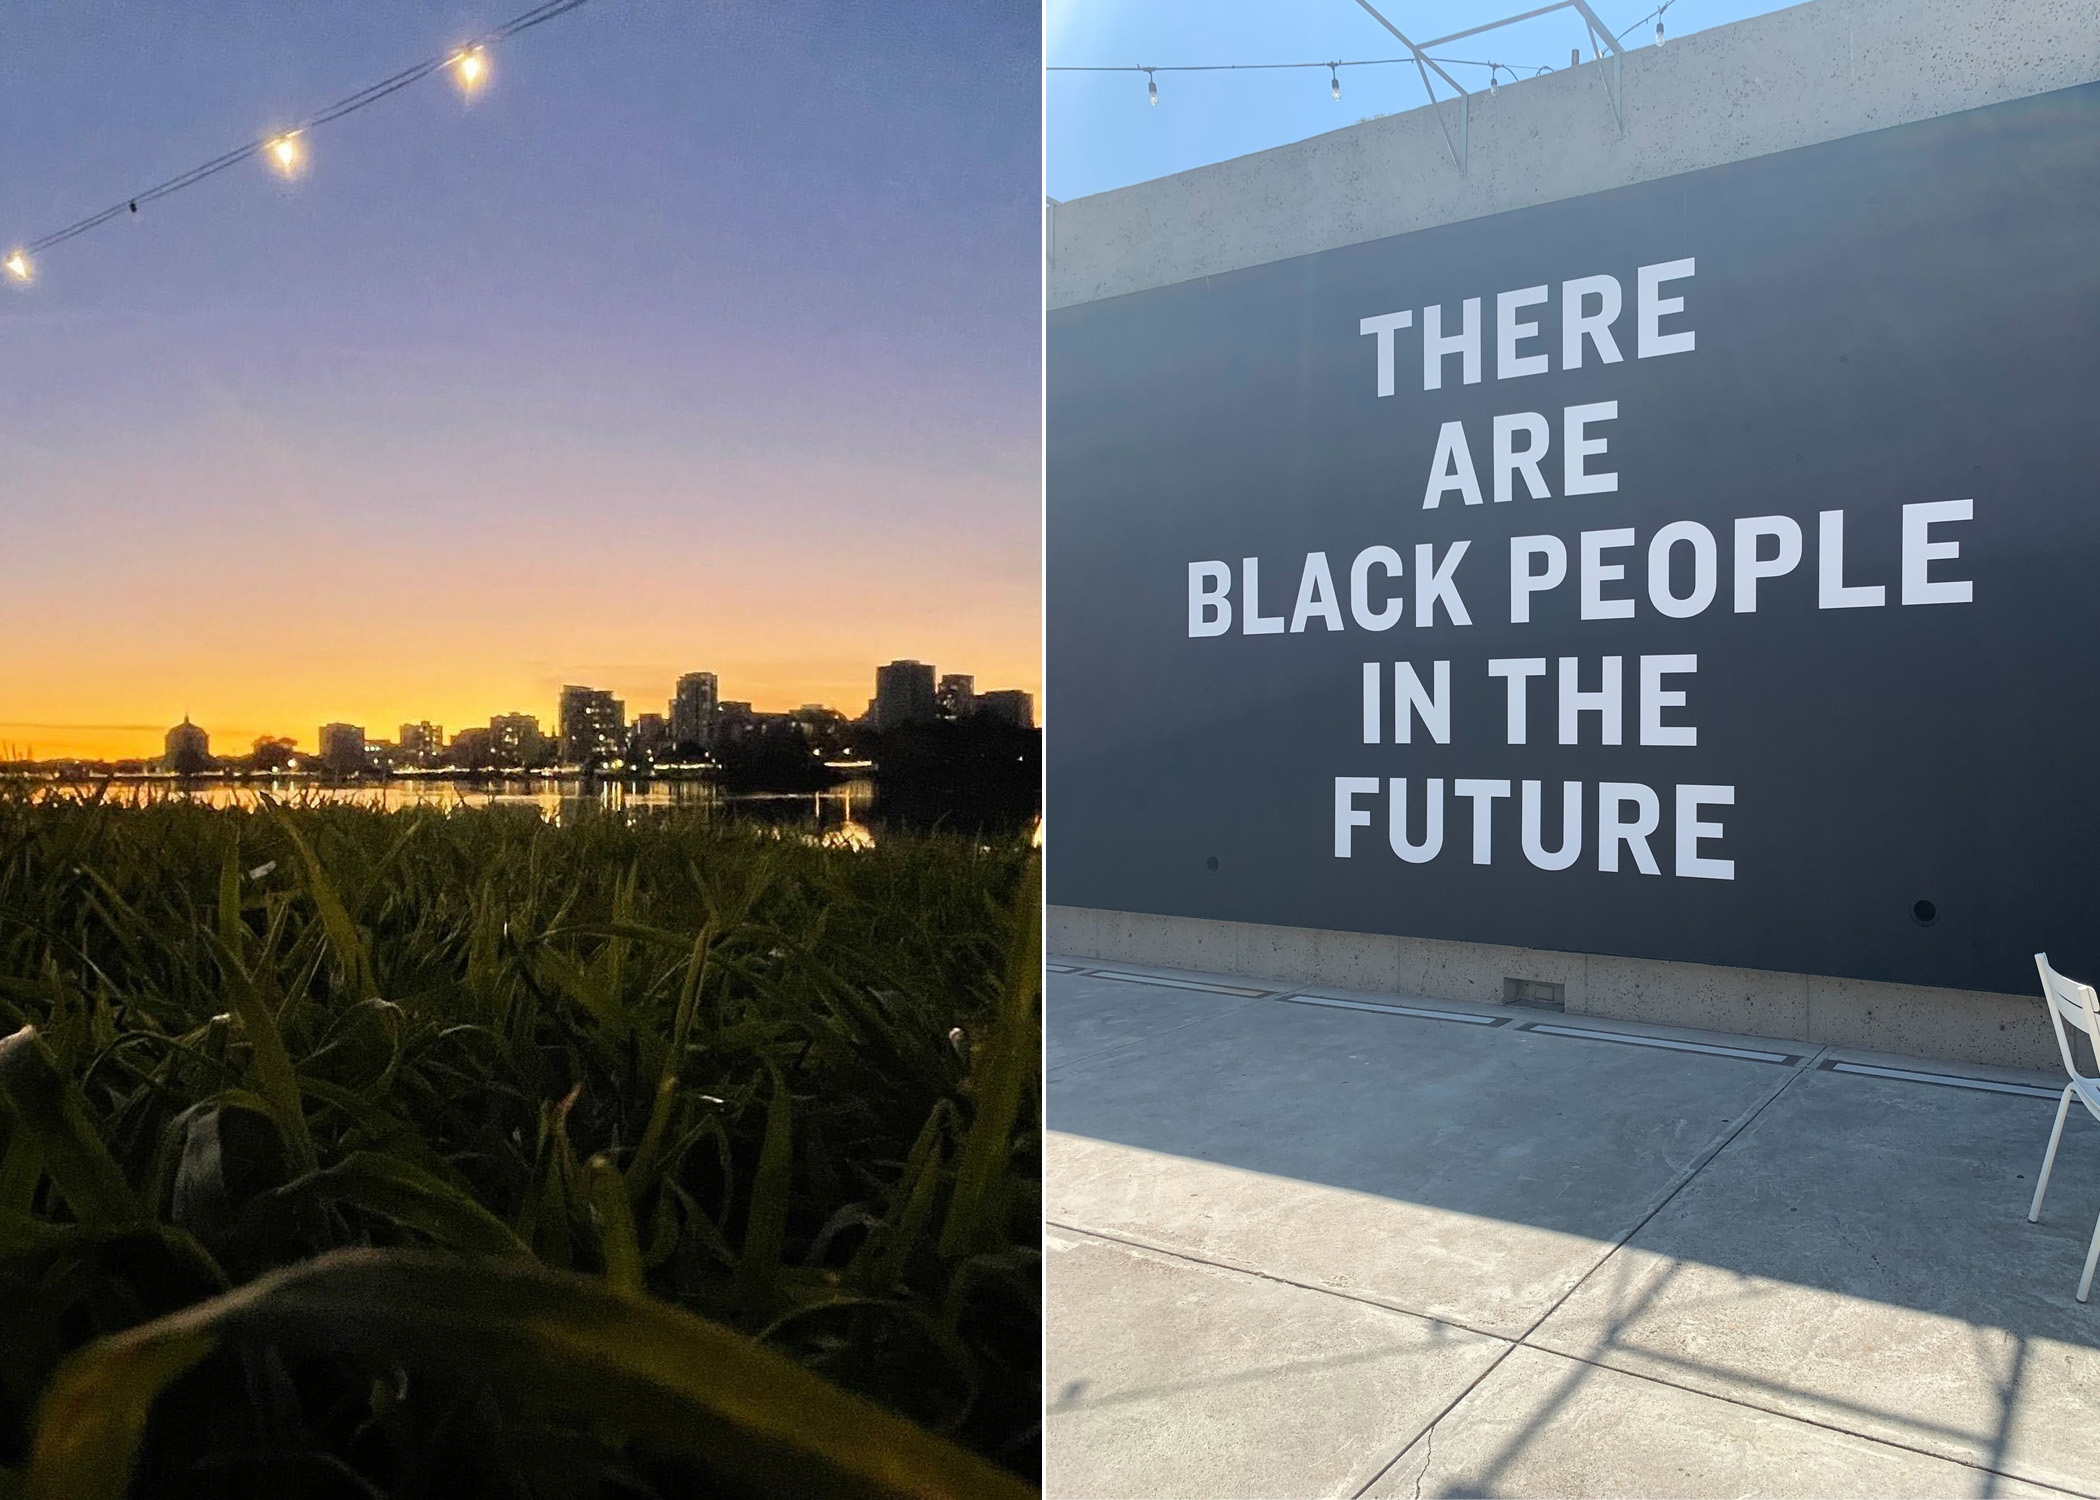 The left side shows twinkling lights over a lake as dark falls. The right shows a sign that says, "There are Black people in the future."